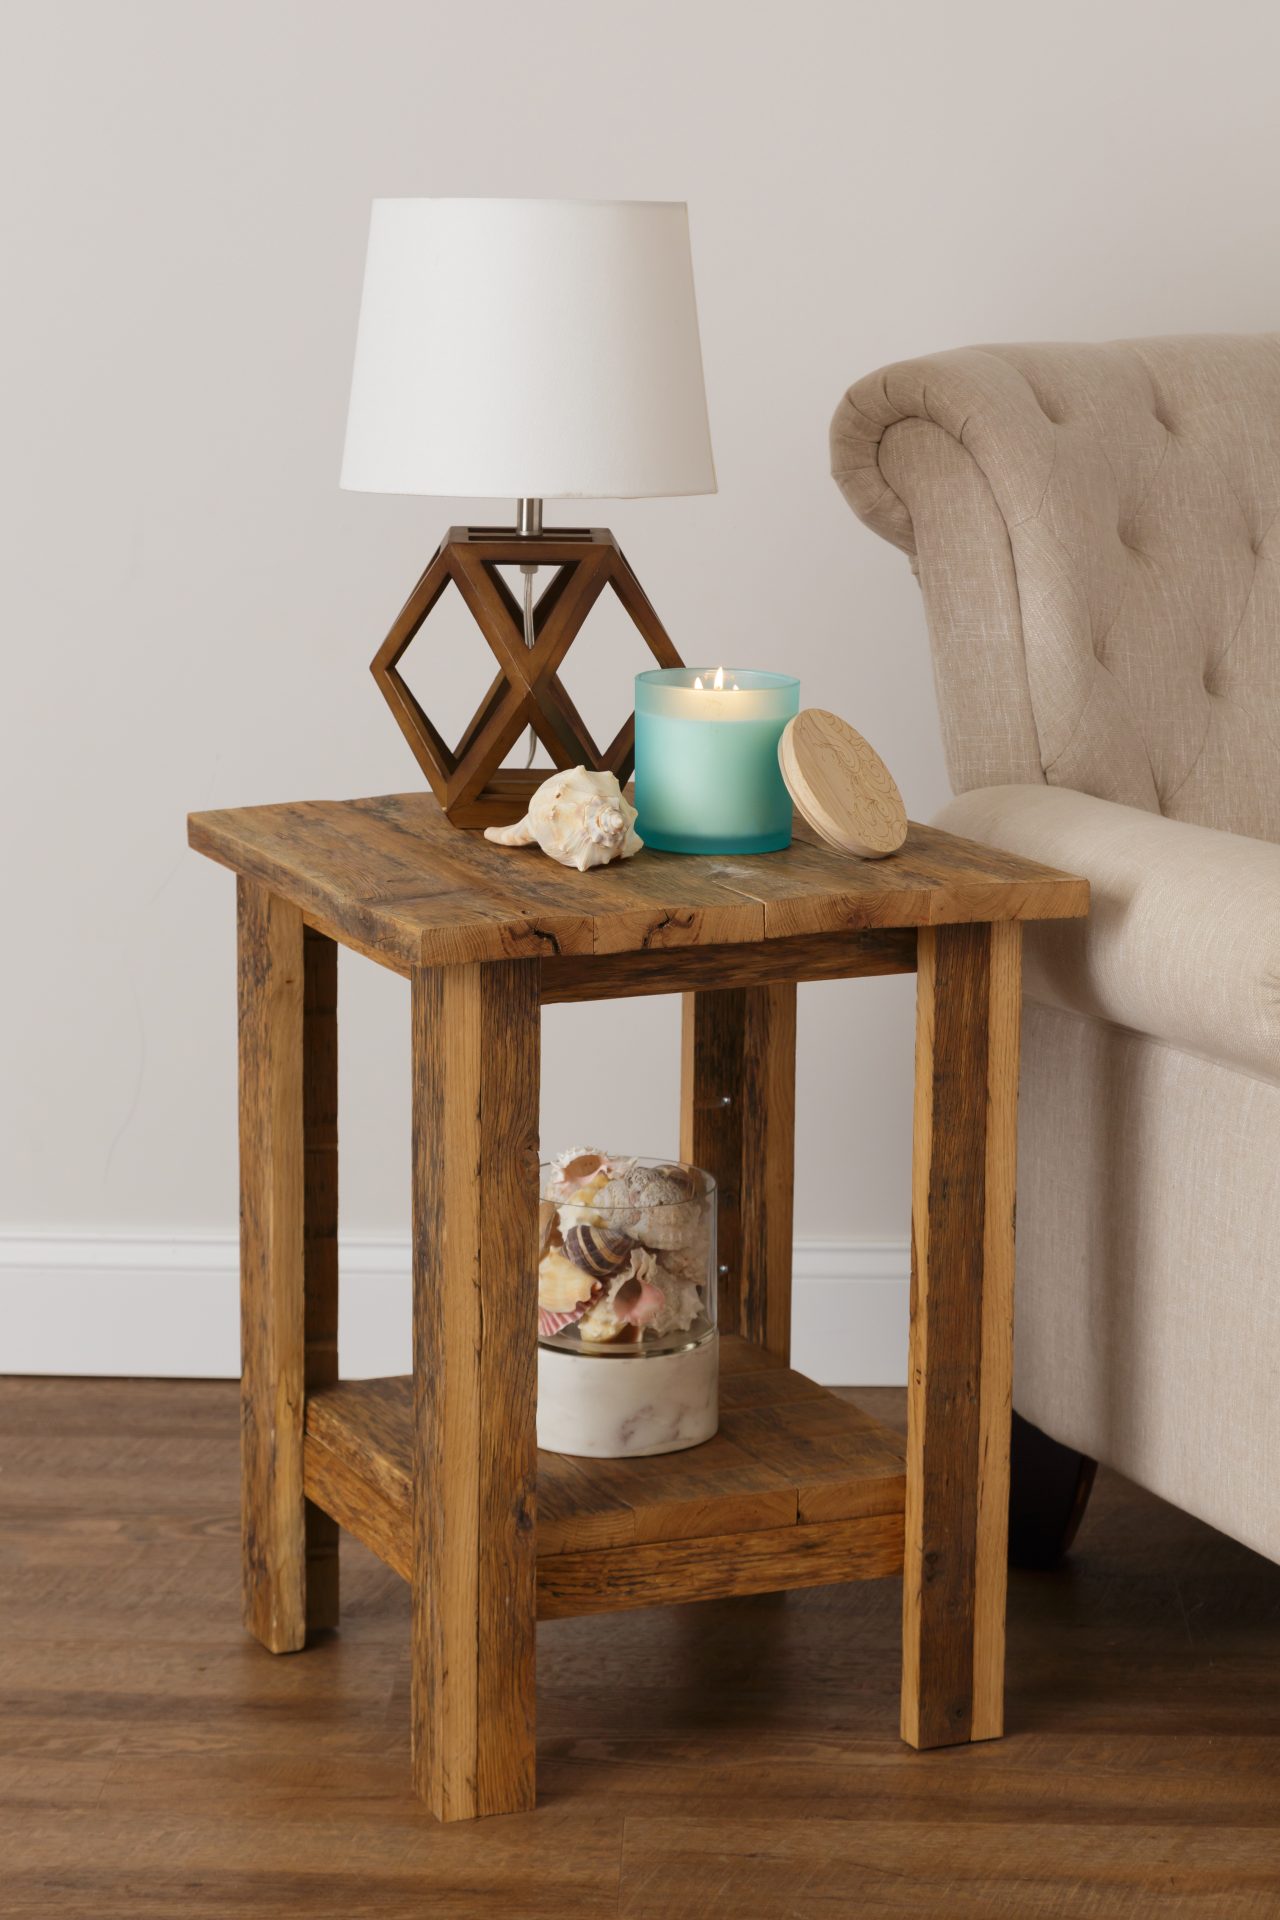 Rustic Reclaimed Oak End Table with Shelf